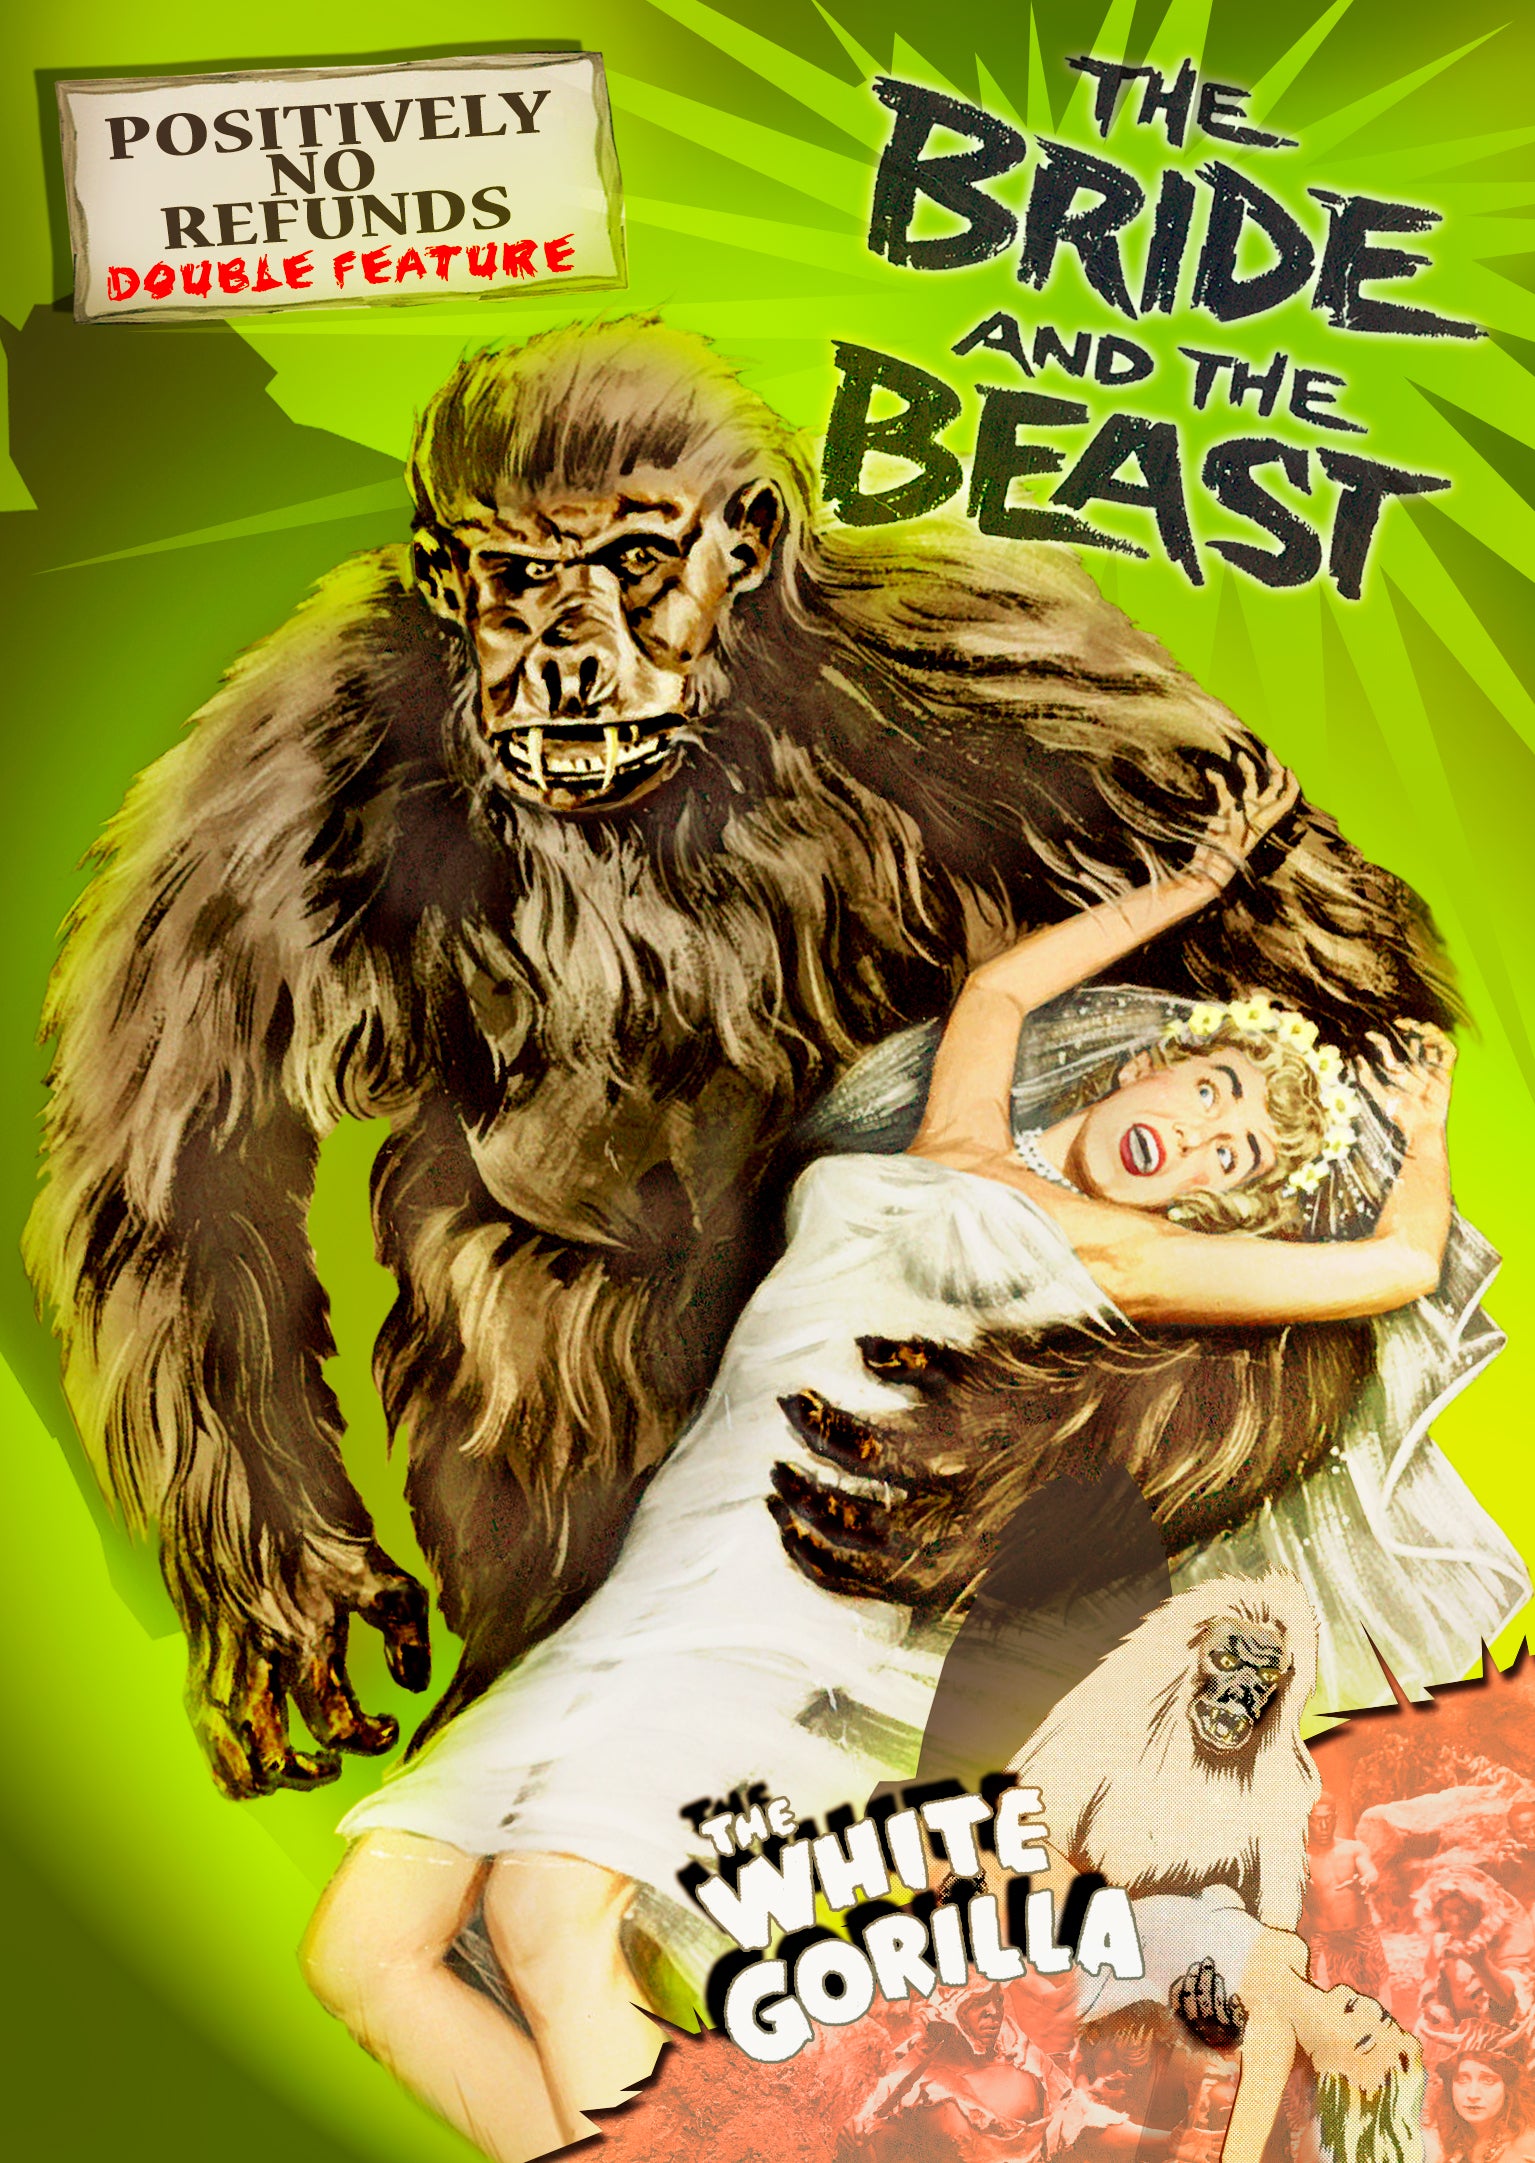 THE BRIDE AND THE BEAST / THE WHITE GORILLA DVD